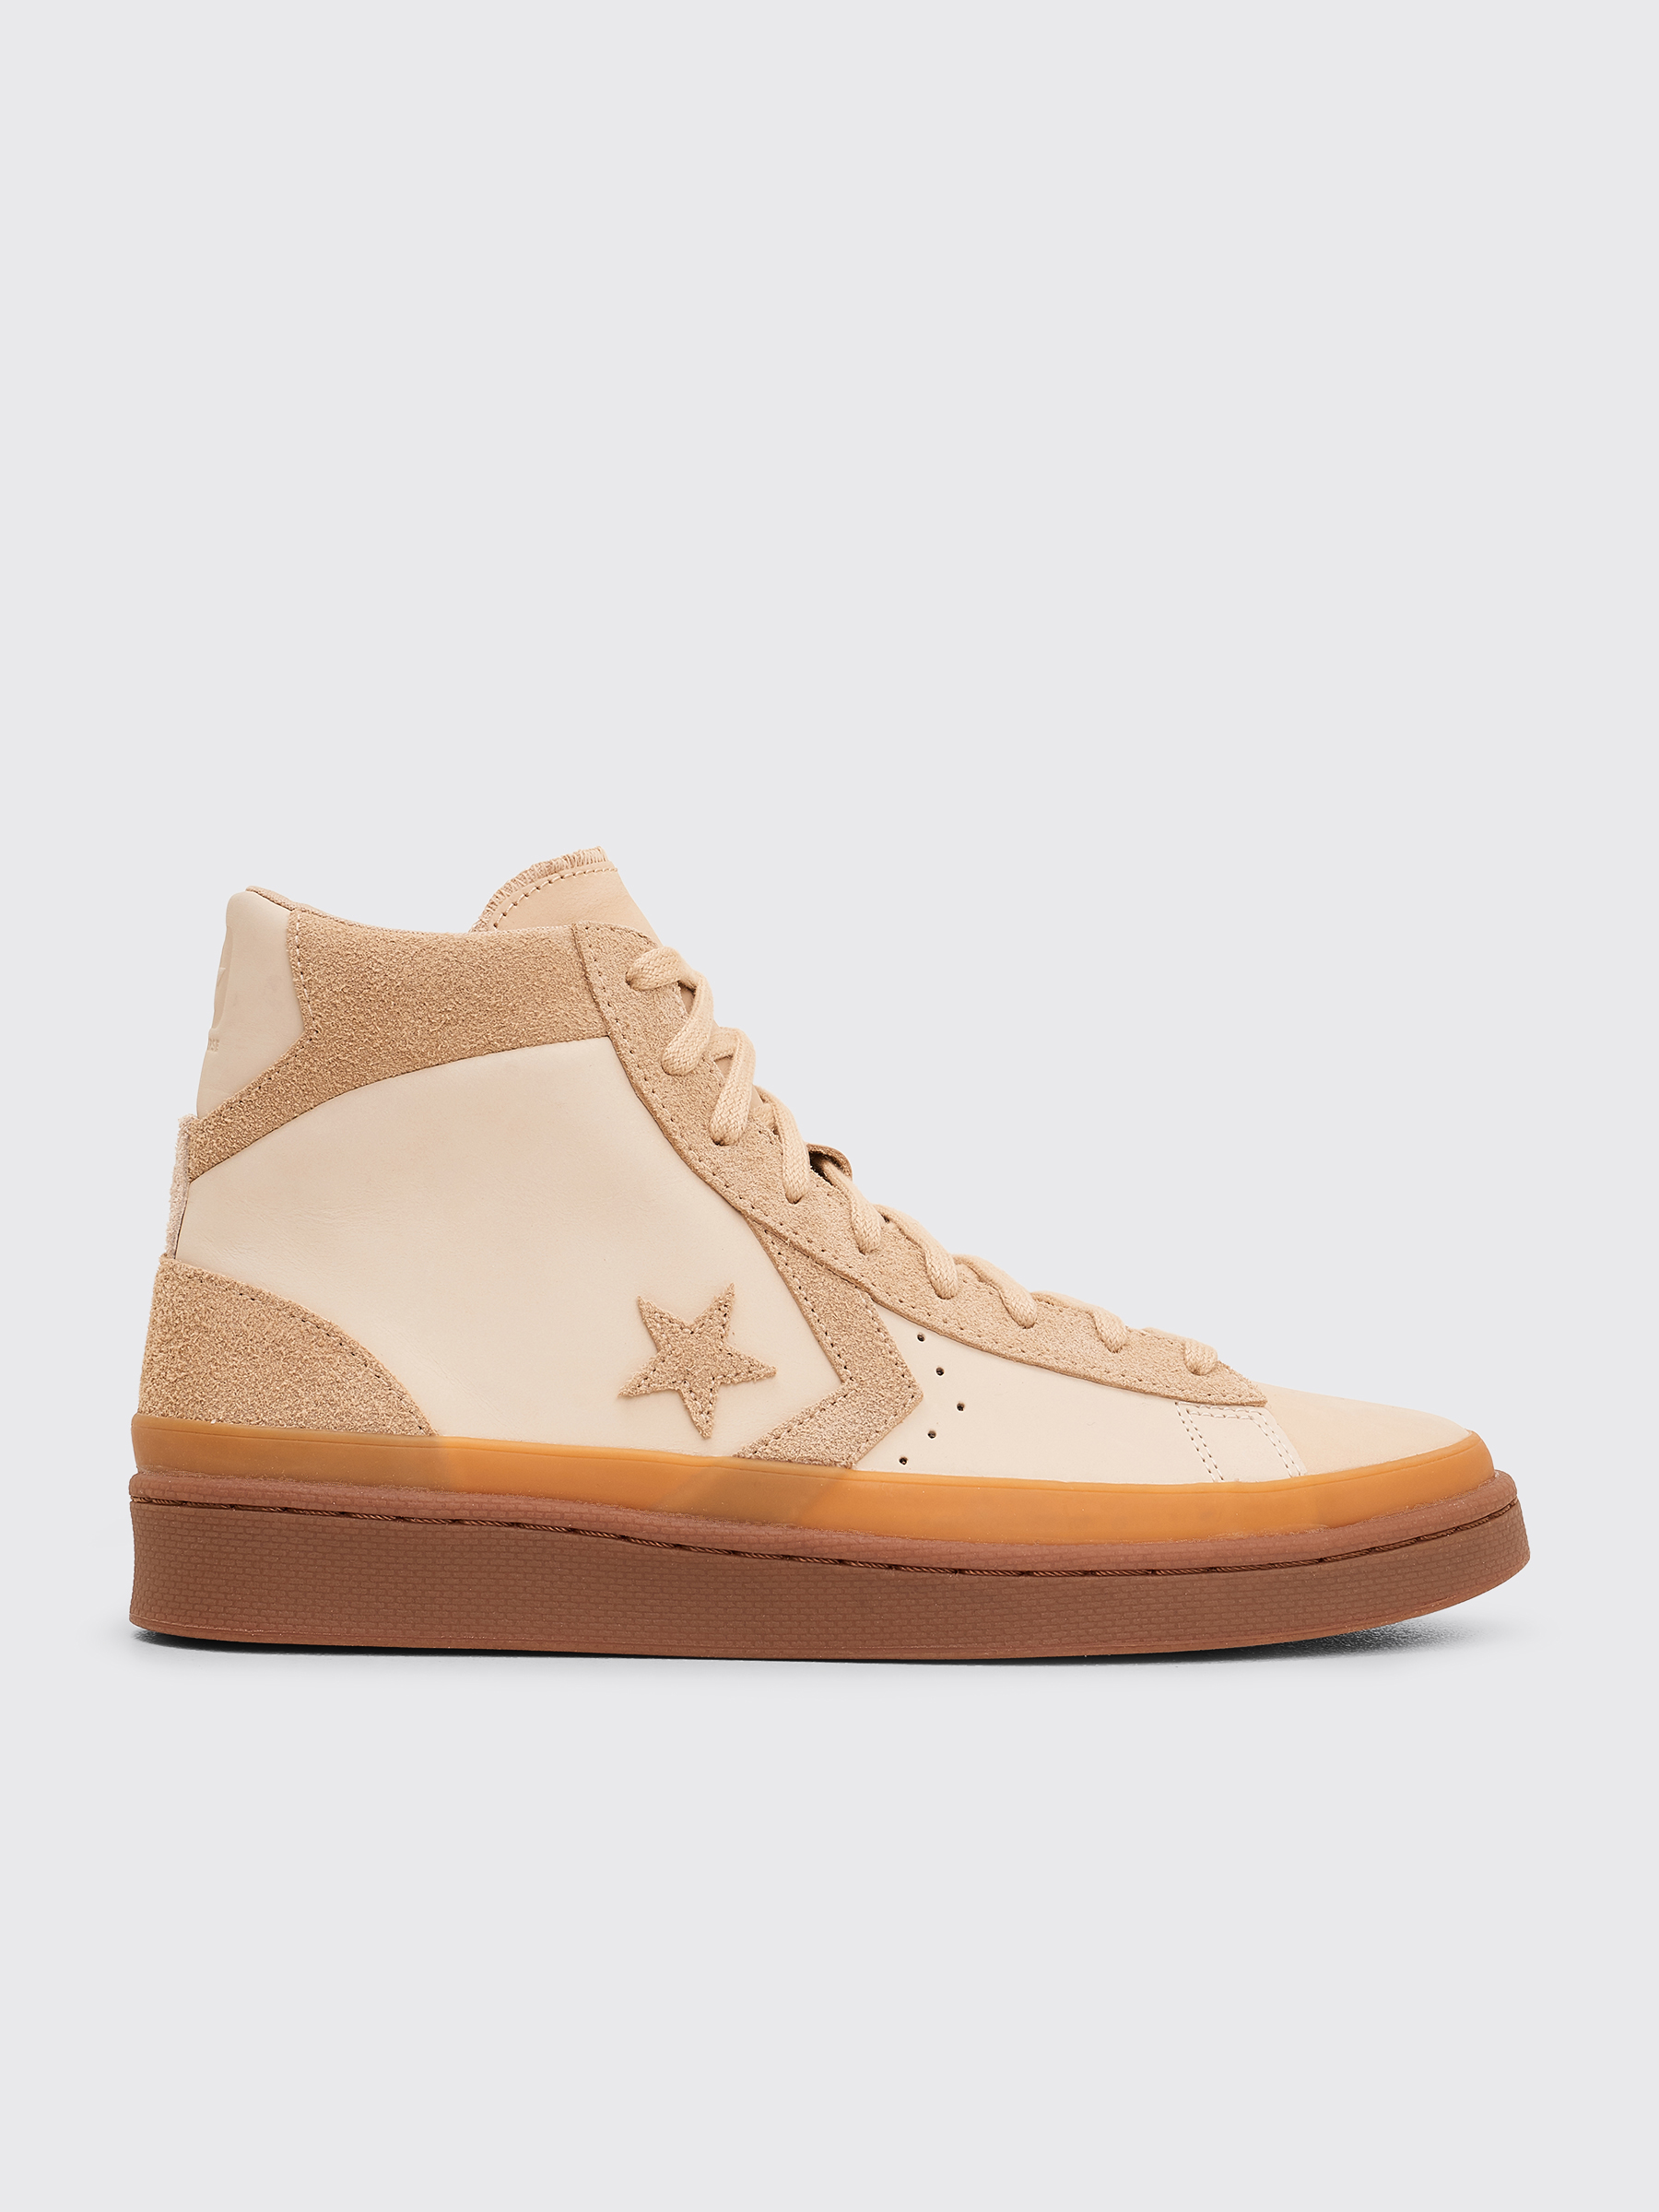 converse pro leather suede